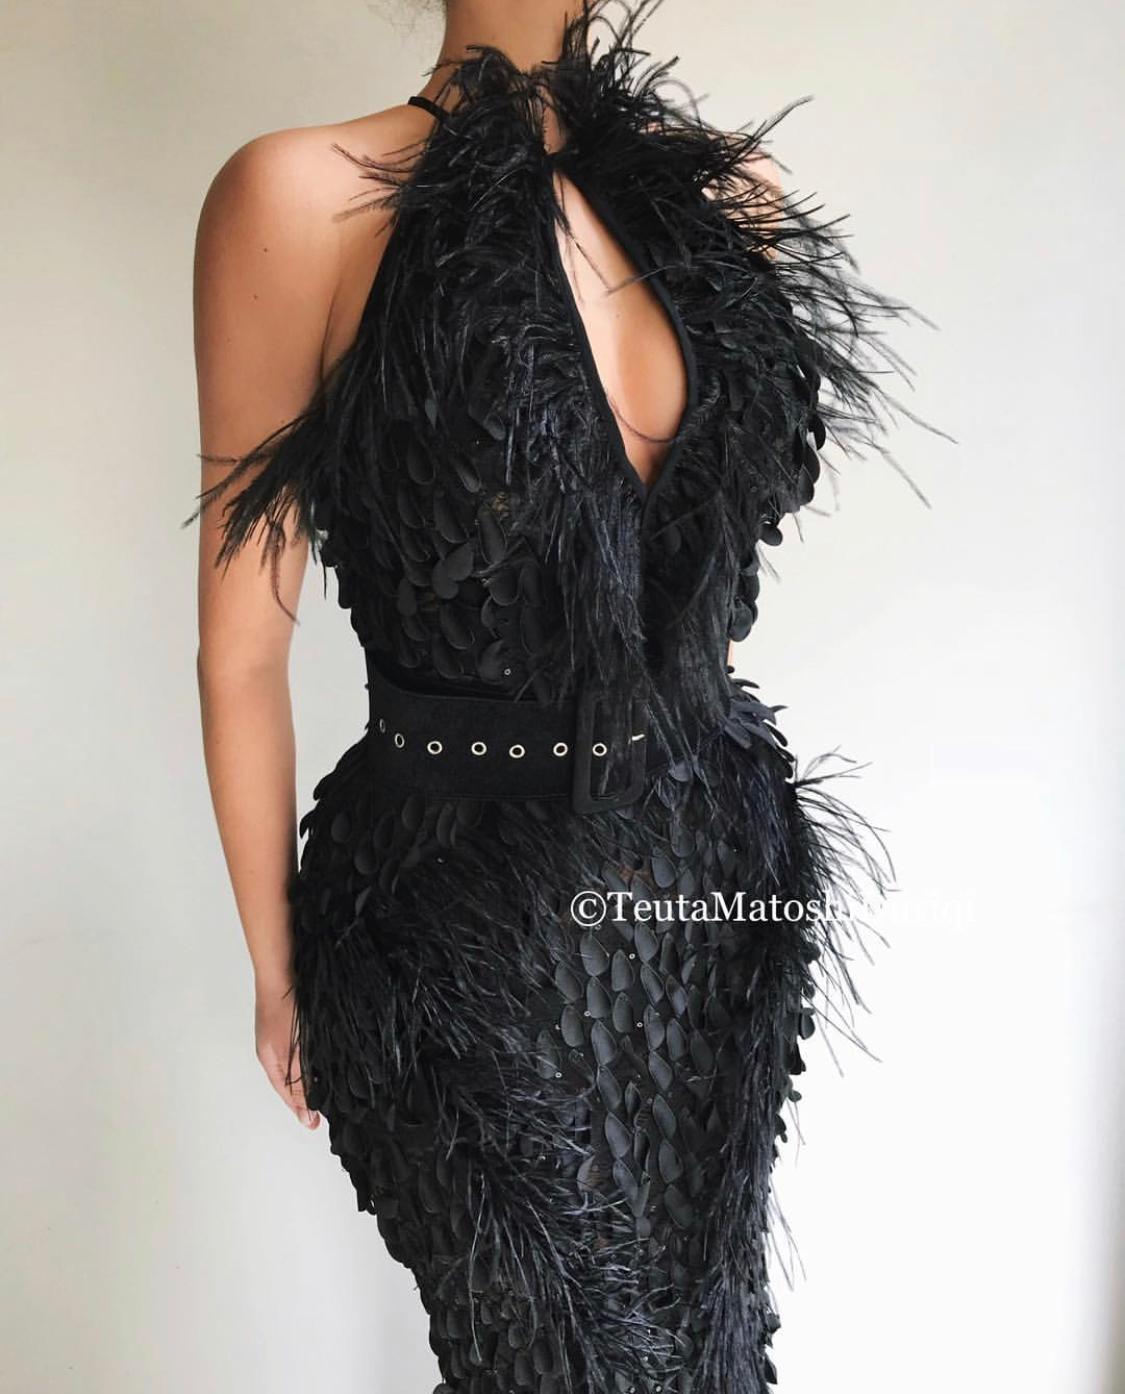 Black mermaid dress with belt, feathers and no sleeves